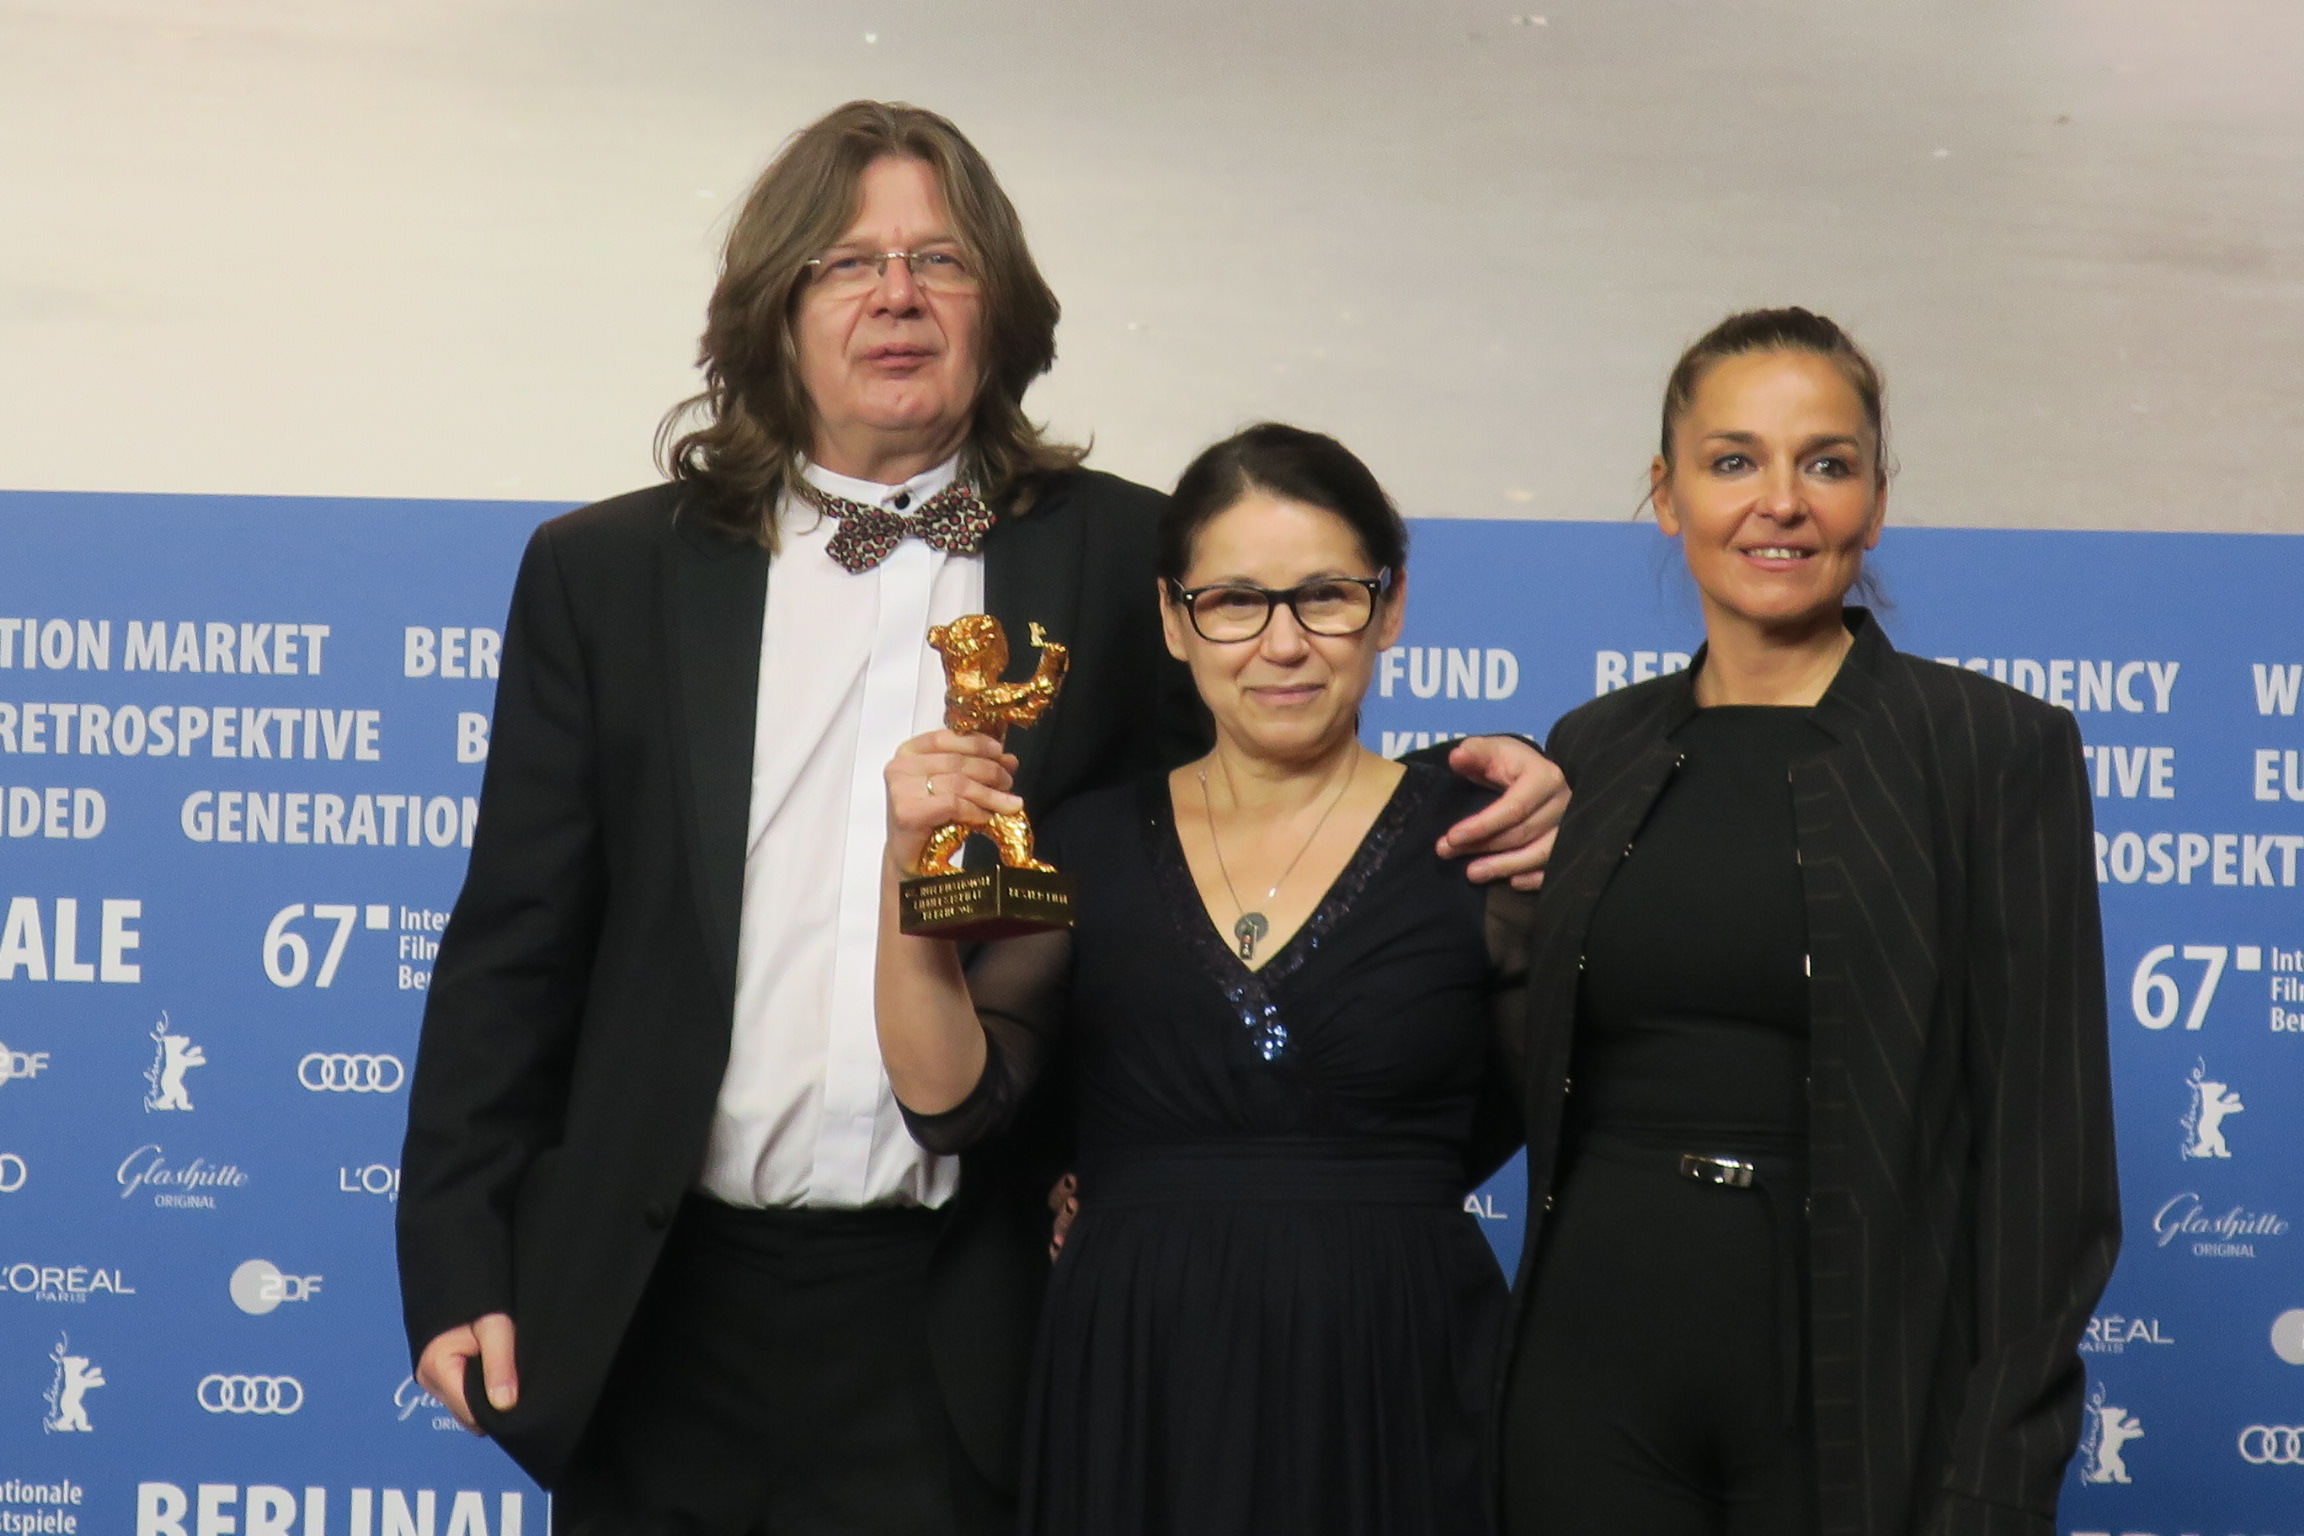 The Final Call at the Berlinale